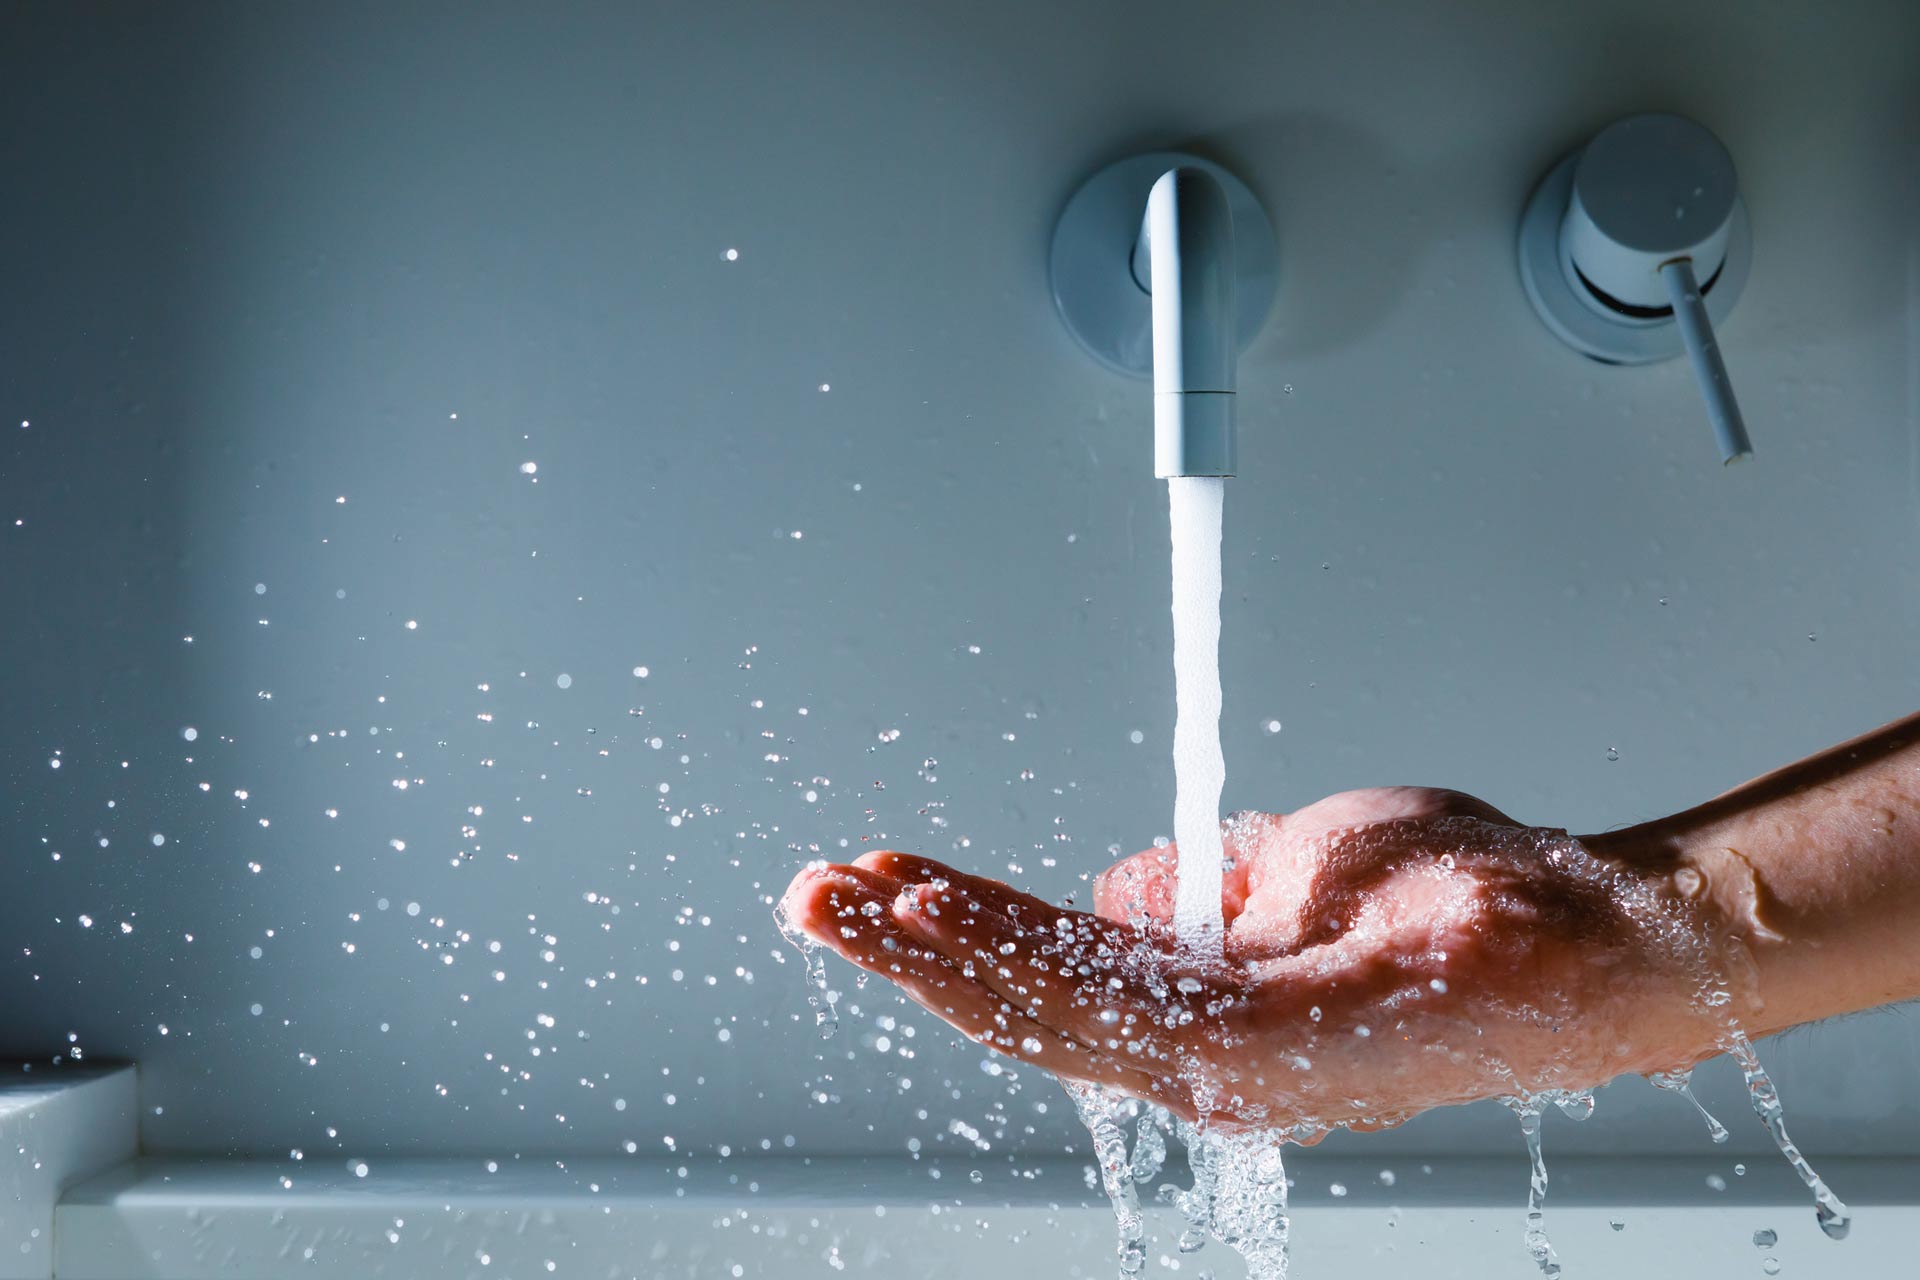 water from a faucet splashing into a cupped hand